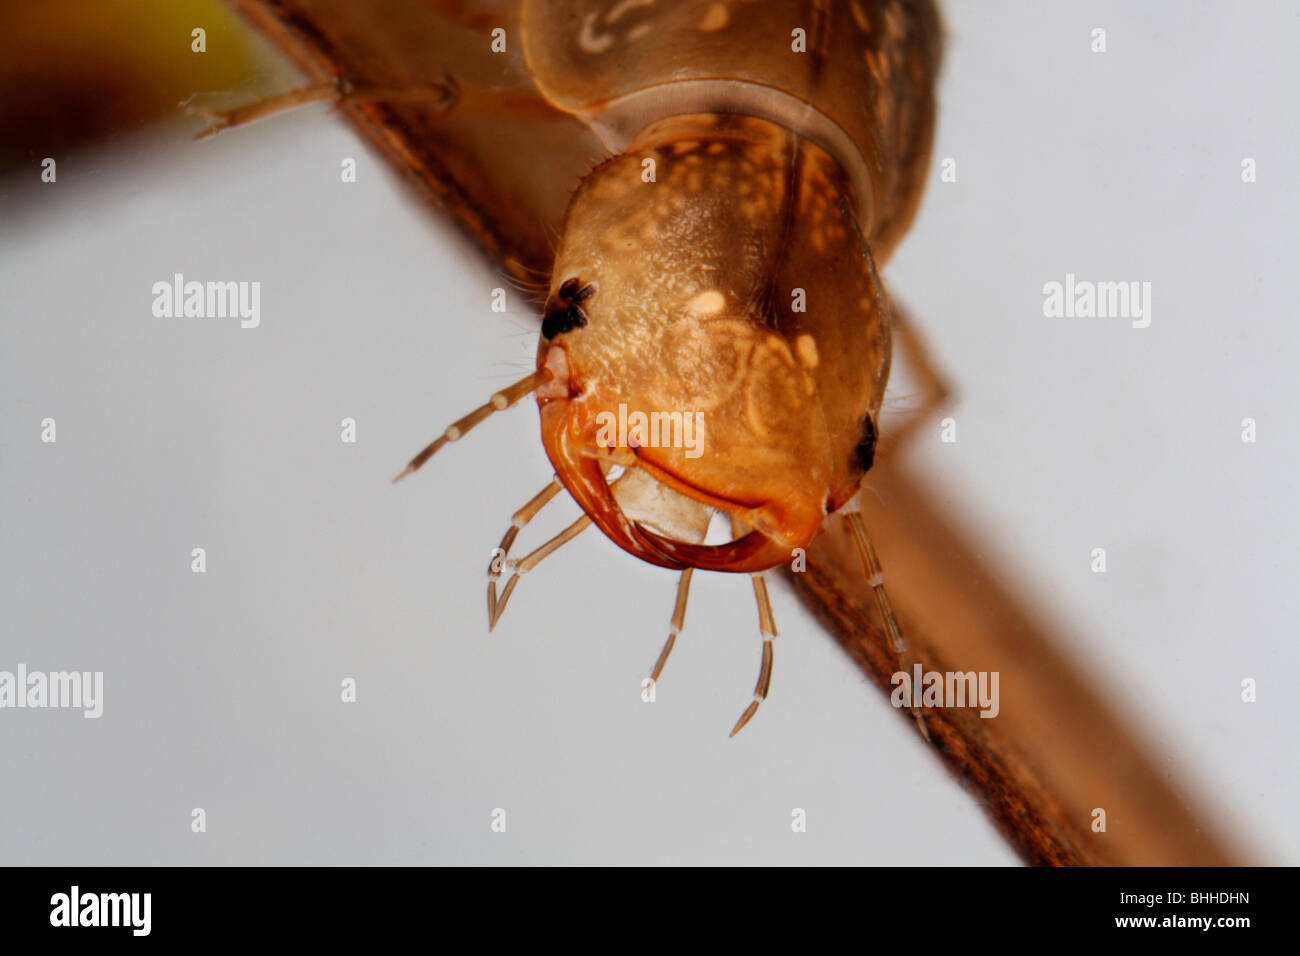 Diving-beetle grub, close-up, Sweden. Stock Photo